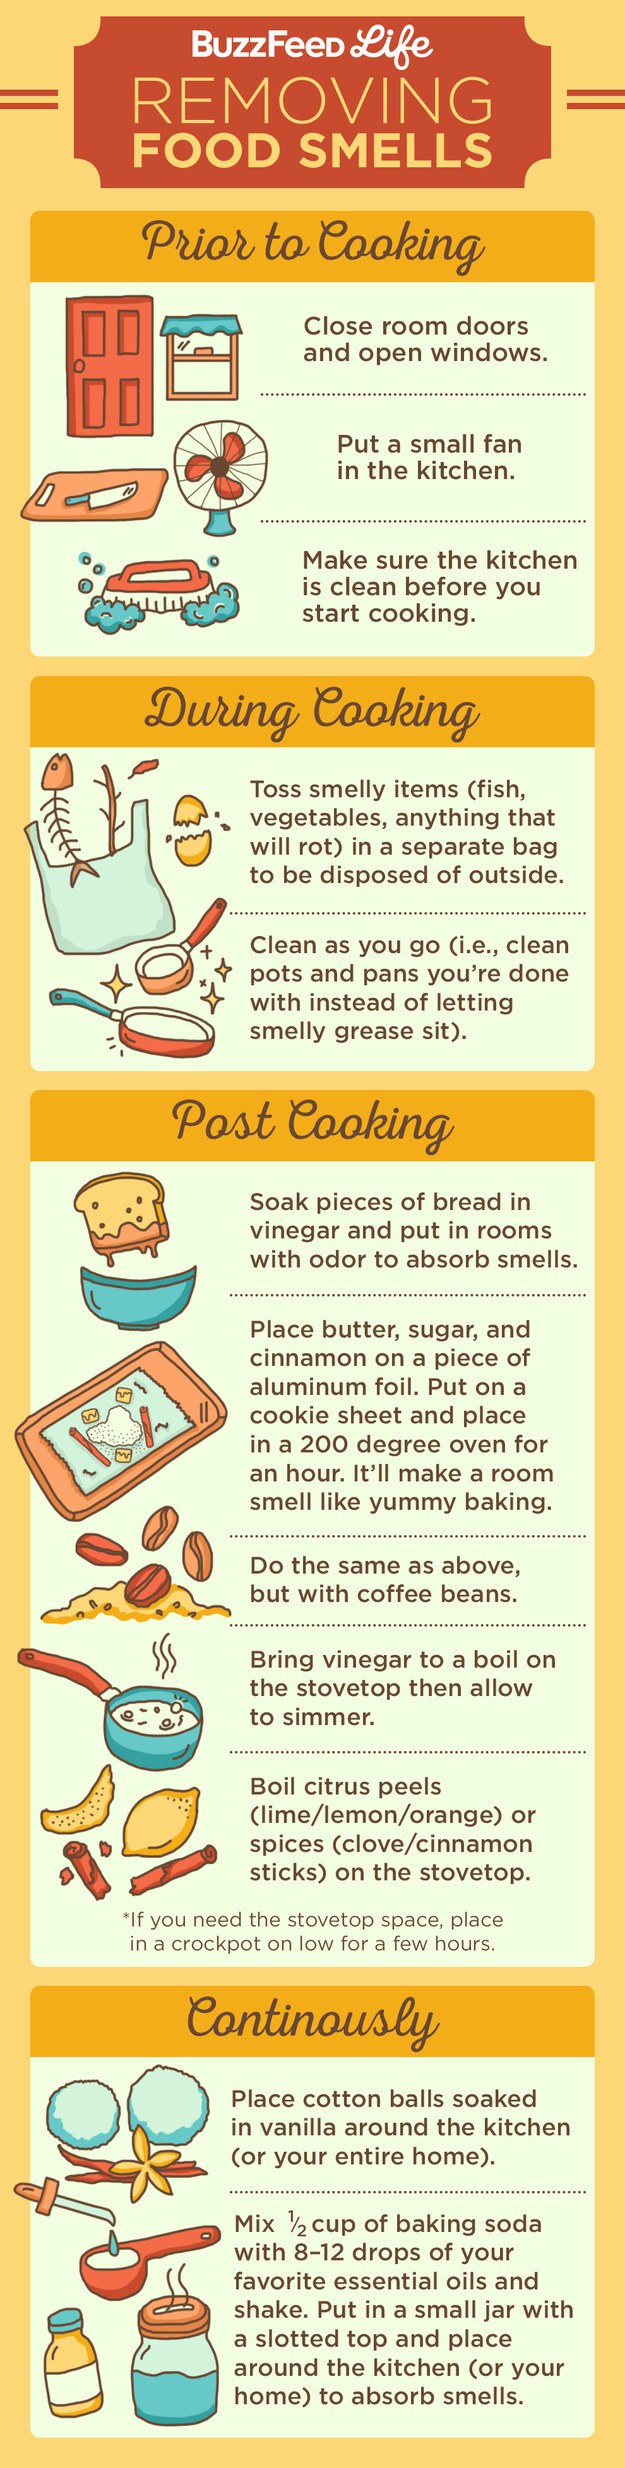 Amazing Home Scent Hacks You Need to Know